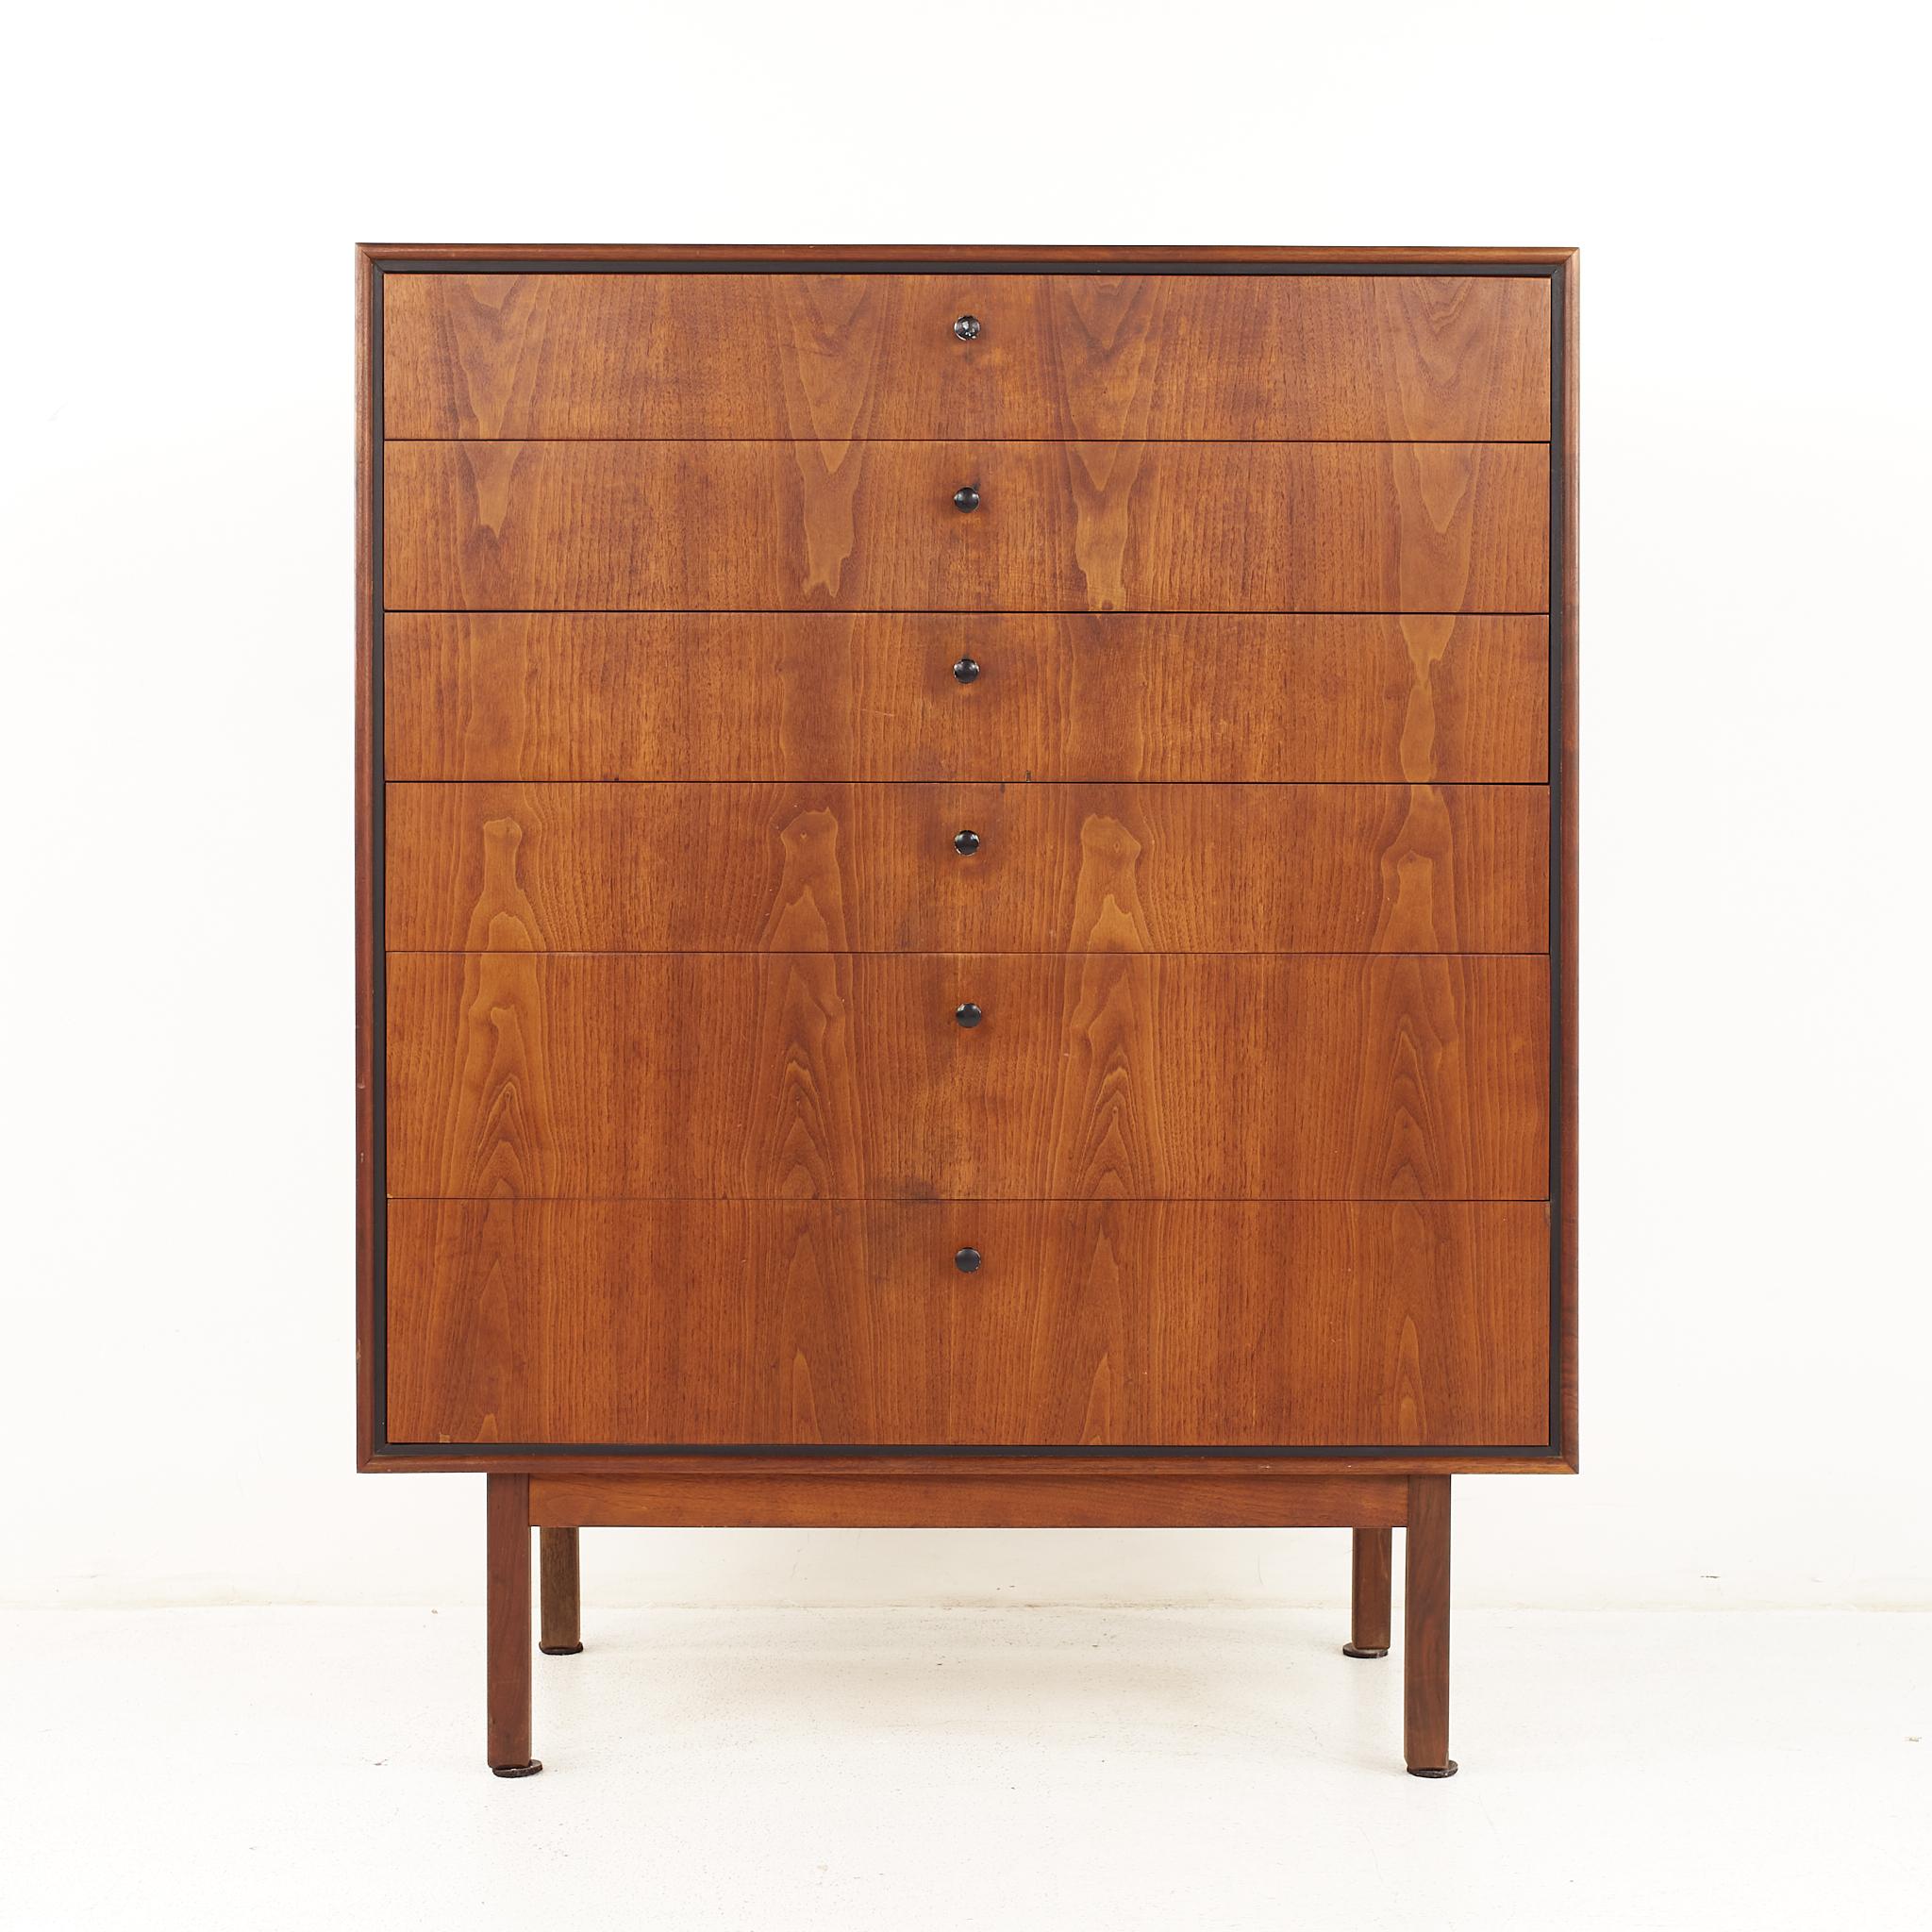 Jack Cartwright for founders mid century walnut highboy dresser

The dresser measures: 36 wide x 18 deep x 45 inches high

All pieces of furniture can be had in what we call restored vintage condition. That means the piece is restored upon